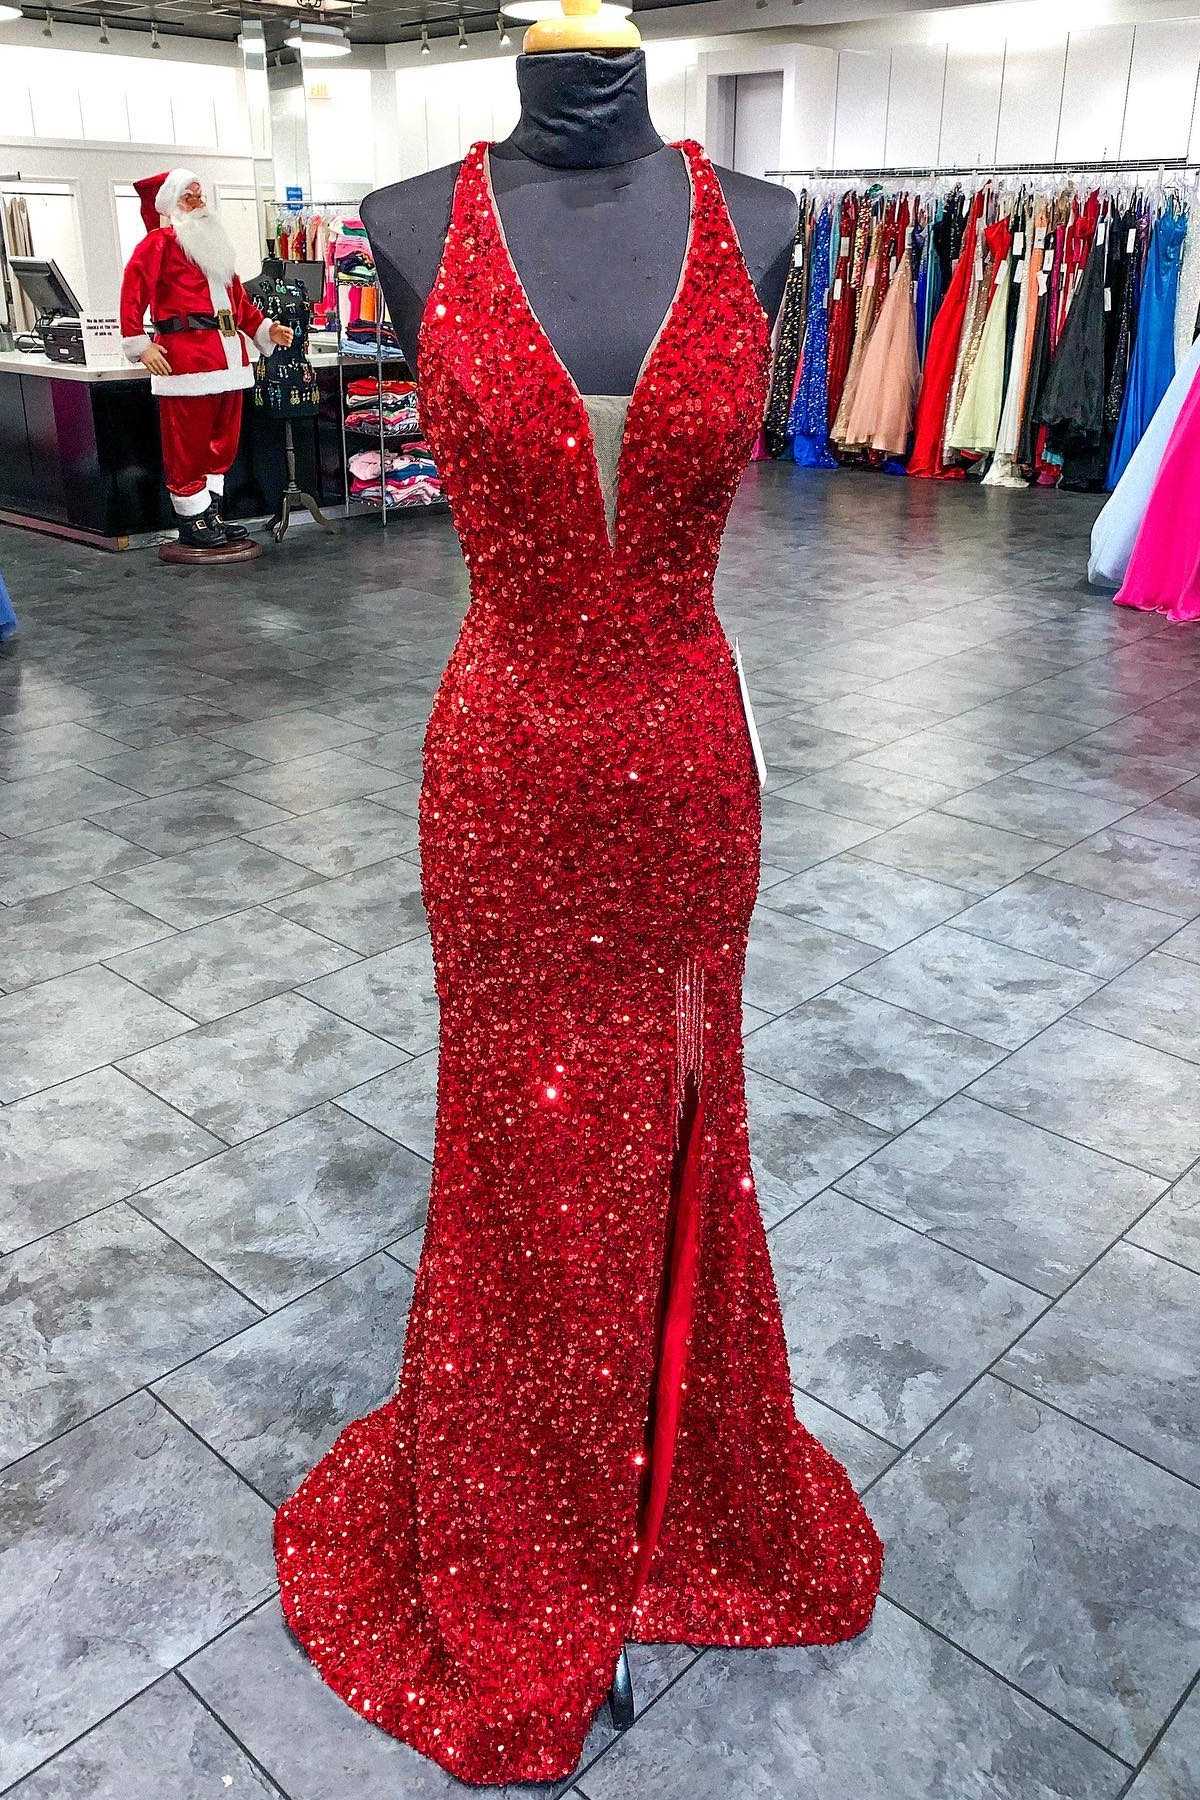 Red Sequin Plunge V Backless Mermaid Long Corset Prom Dress with Slit Gowns, Wedding Pictures Ideas